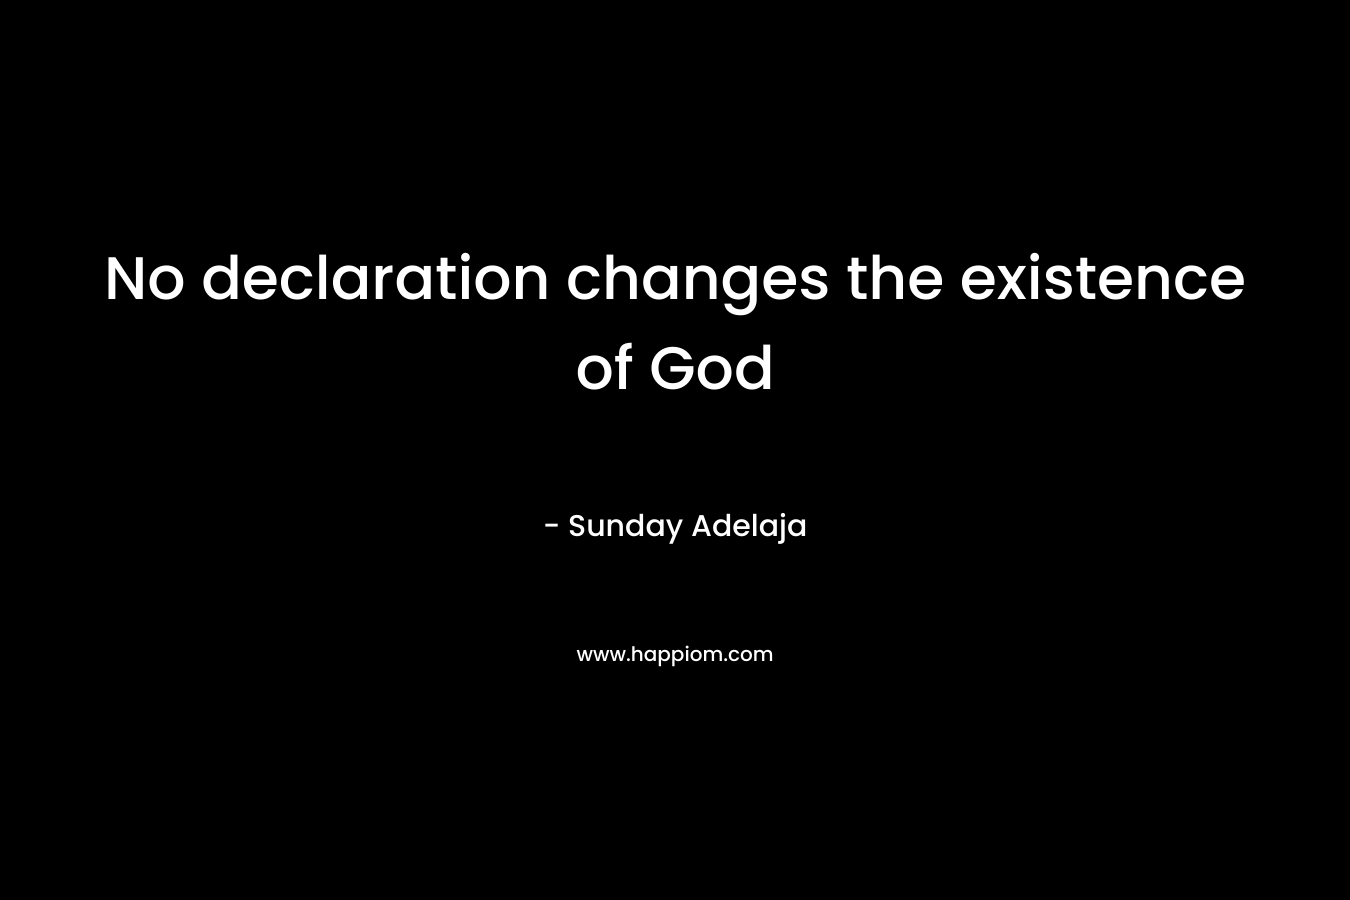 No declaration changes the existence of God